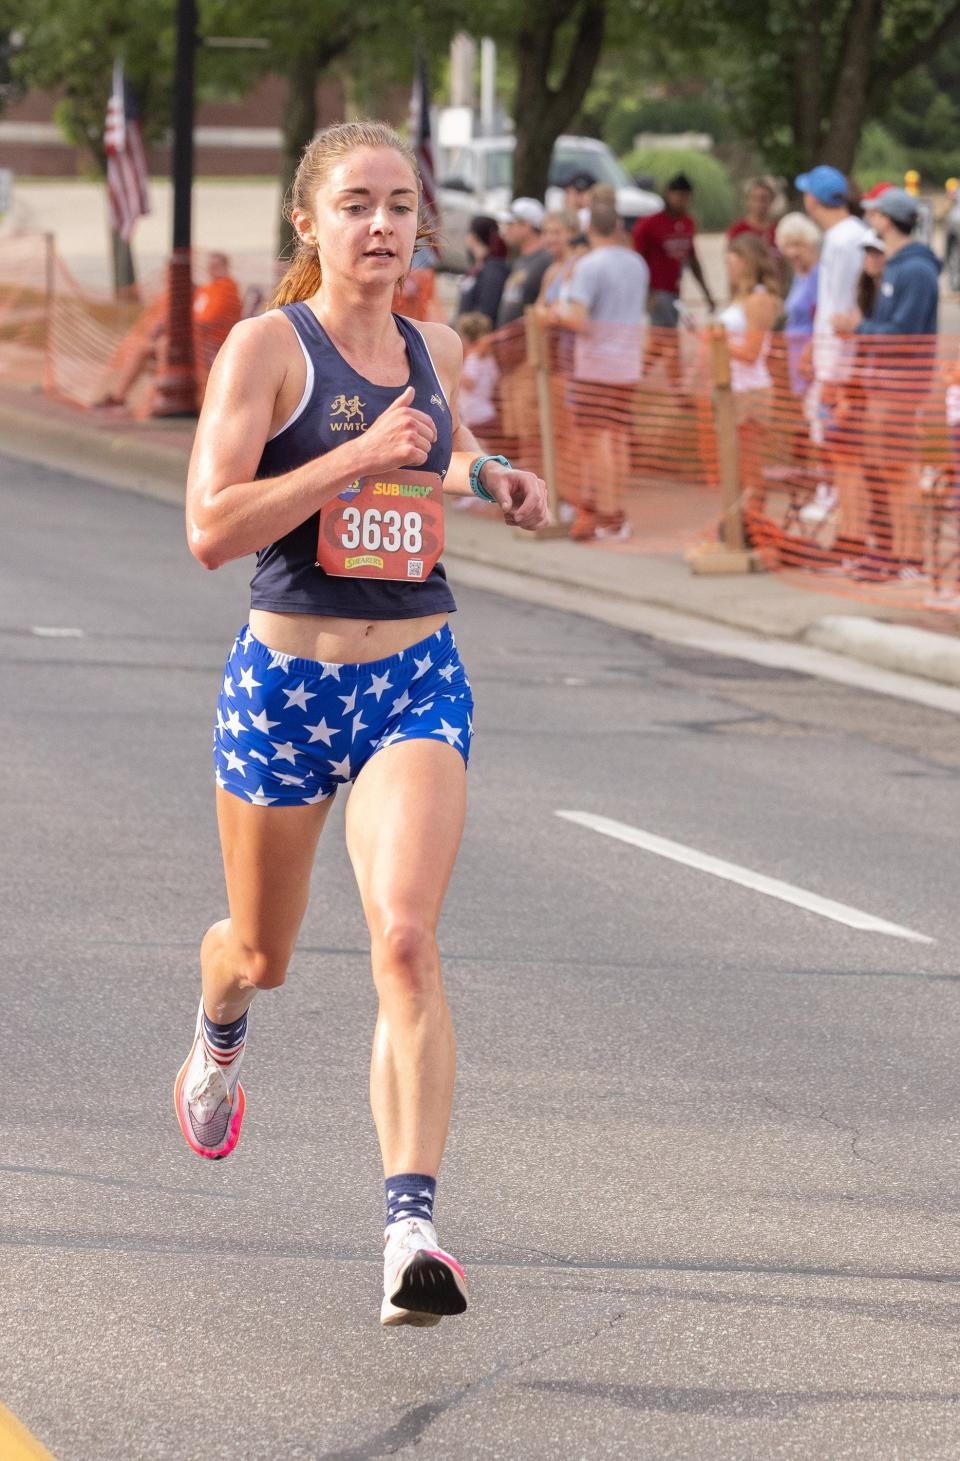 Abbey Warth from Indianapolis wins the women’s two-mile race Tuesday at the 45th annual North Canton YMCA two-mile walk/run and five-mile run.